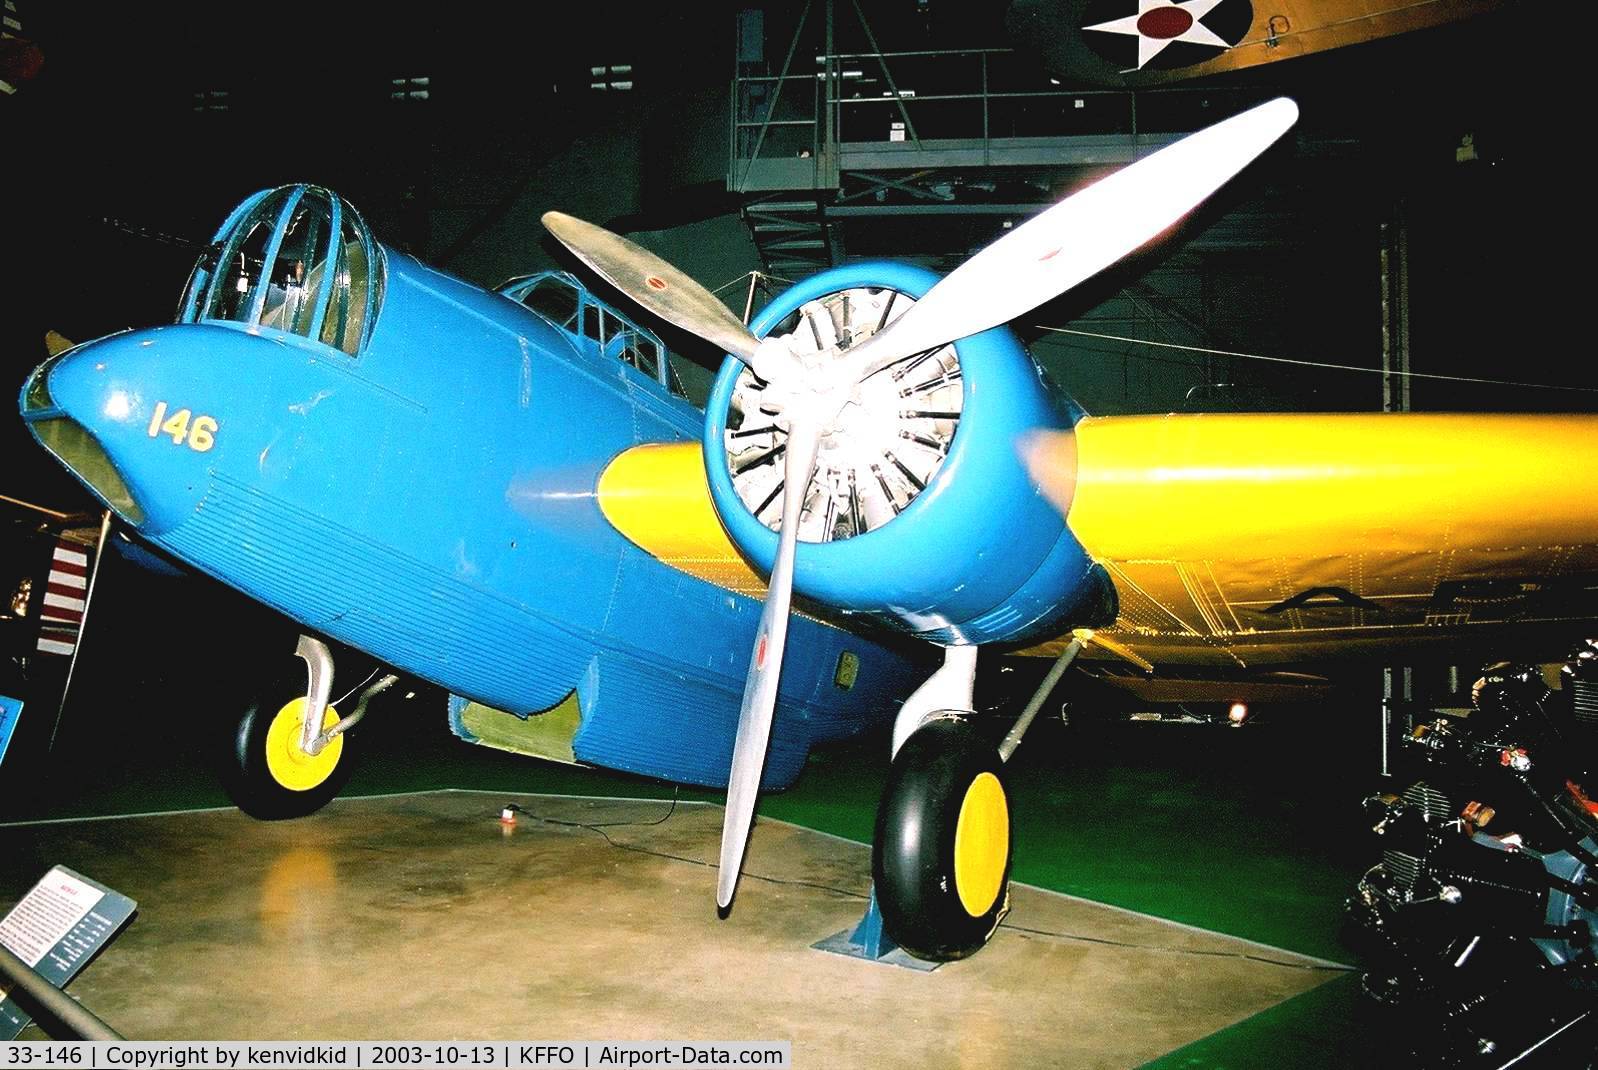 33-146, 1933 Martin YB-10 C/N 514, At the Museum of the United States Air Force Dayton Ohio.